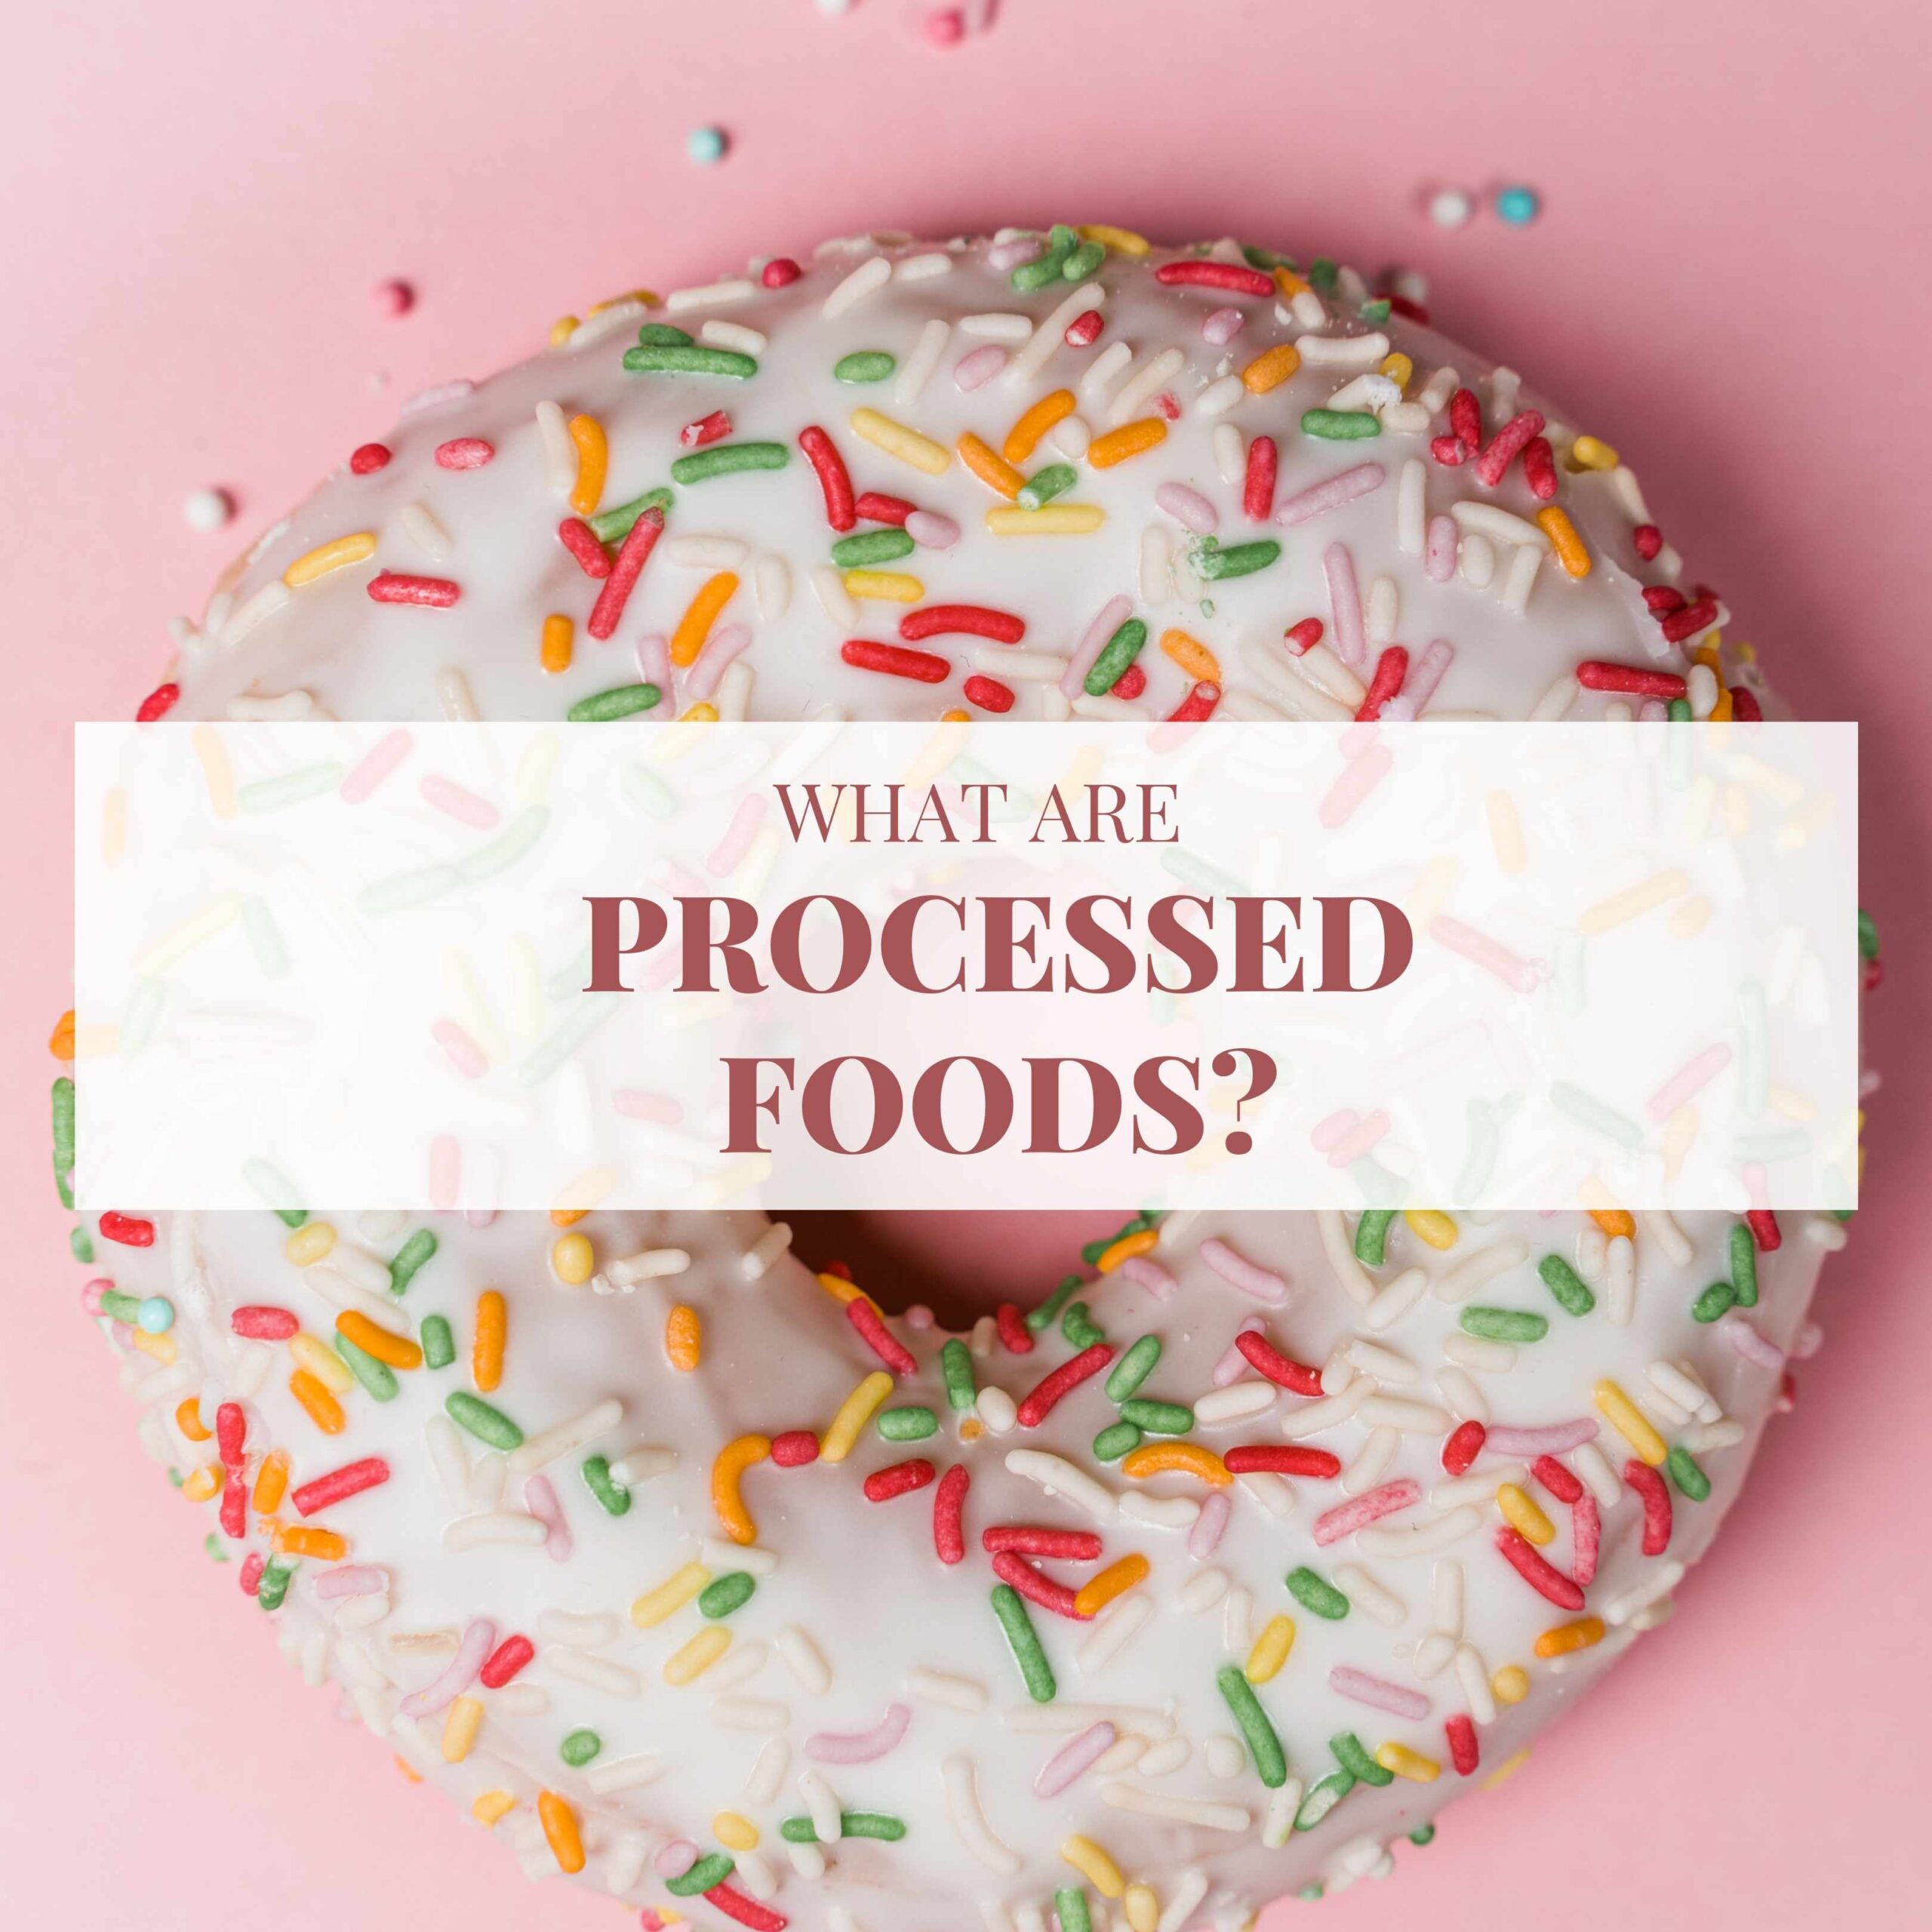 What are Processed Foods?